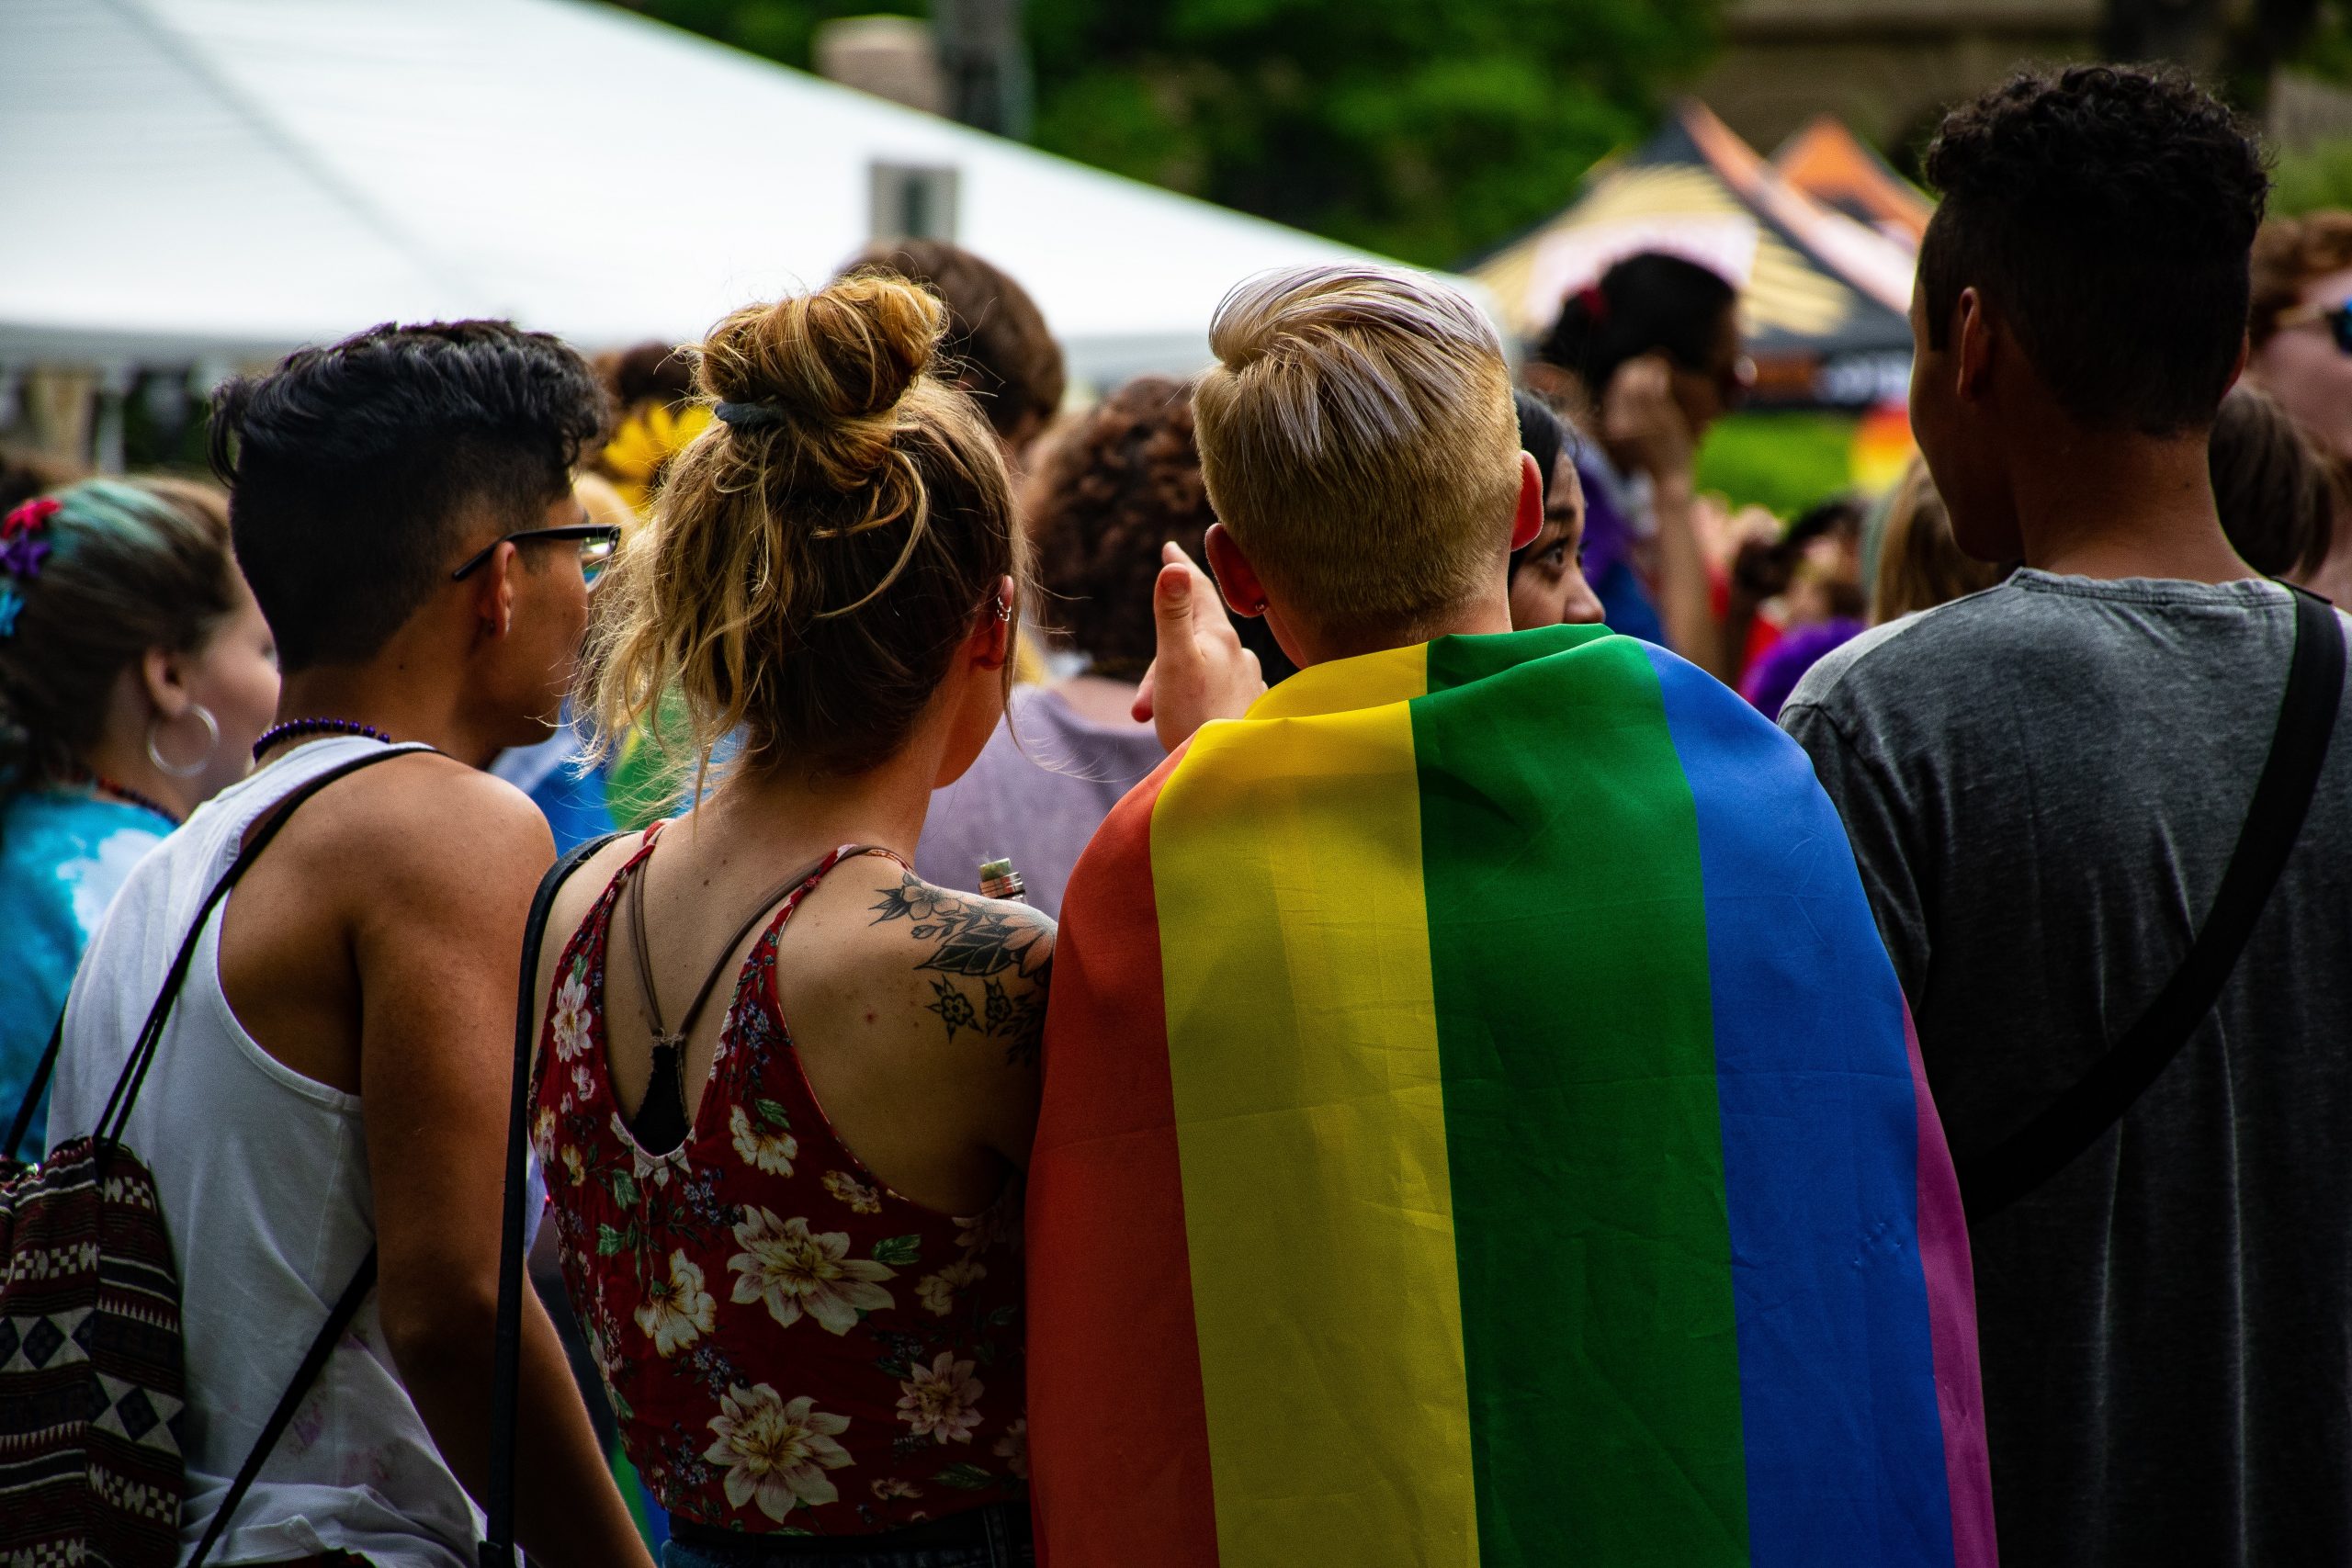 The photo focuses on the backs of a group of friends at a Pride event. One is draped in a Pride flag